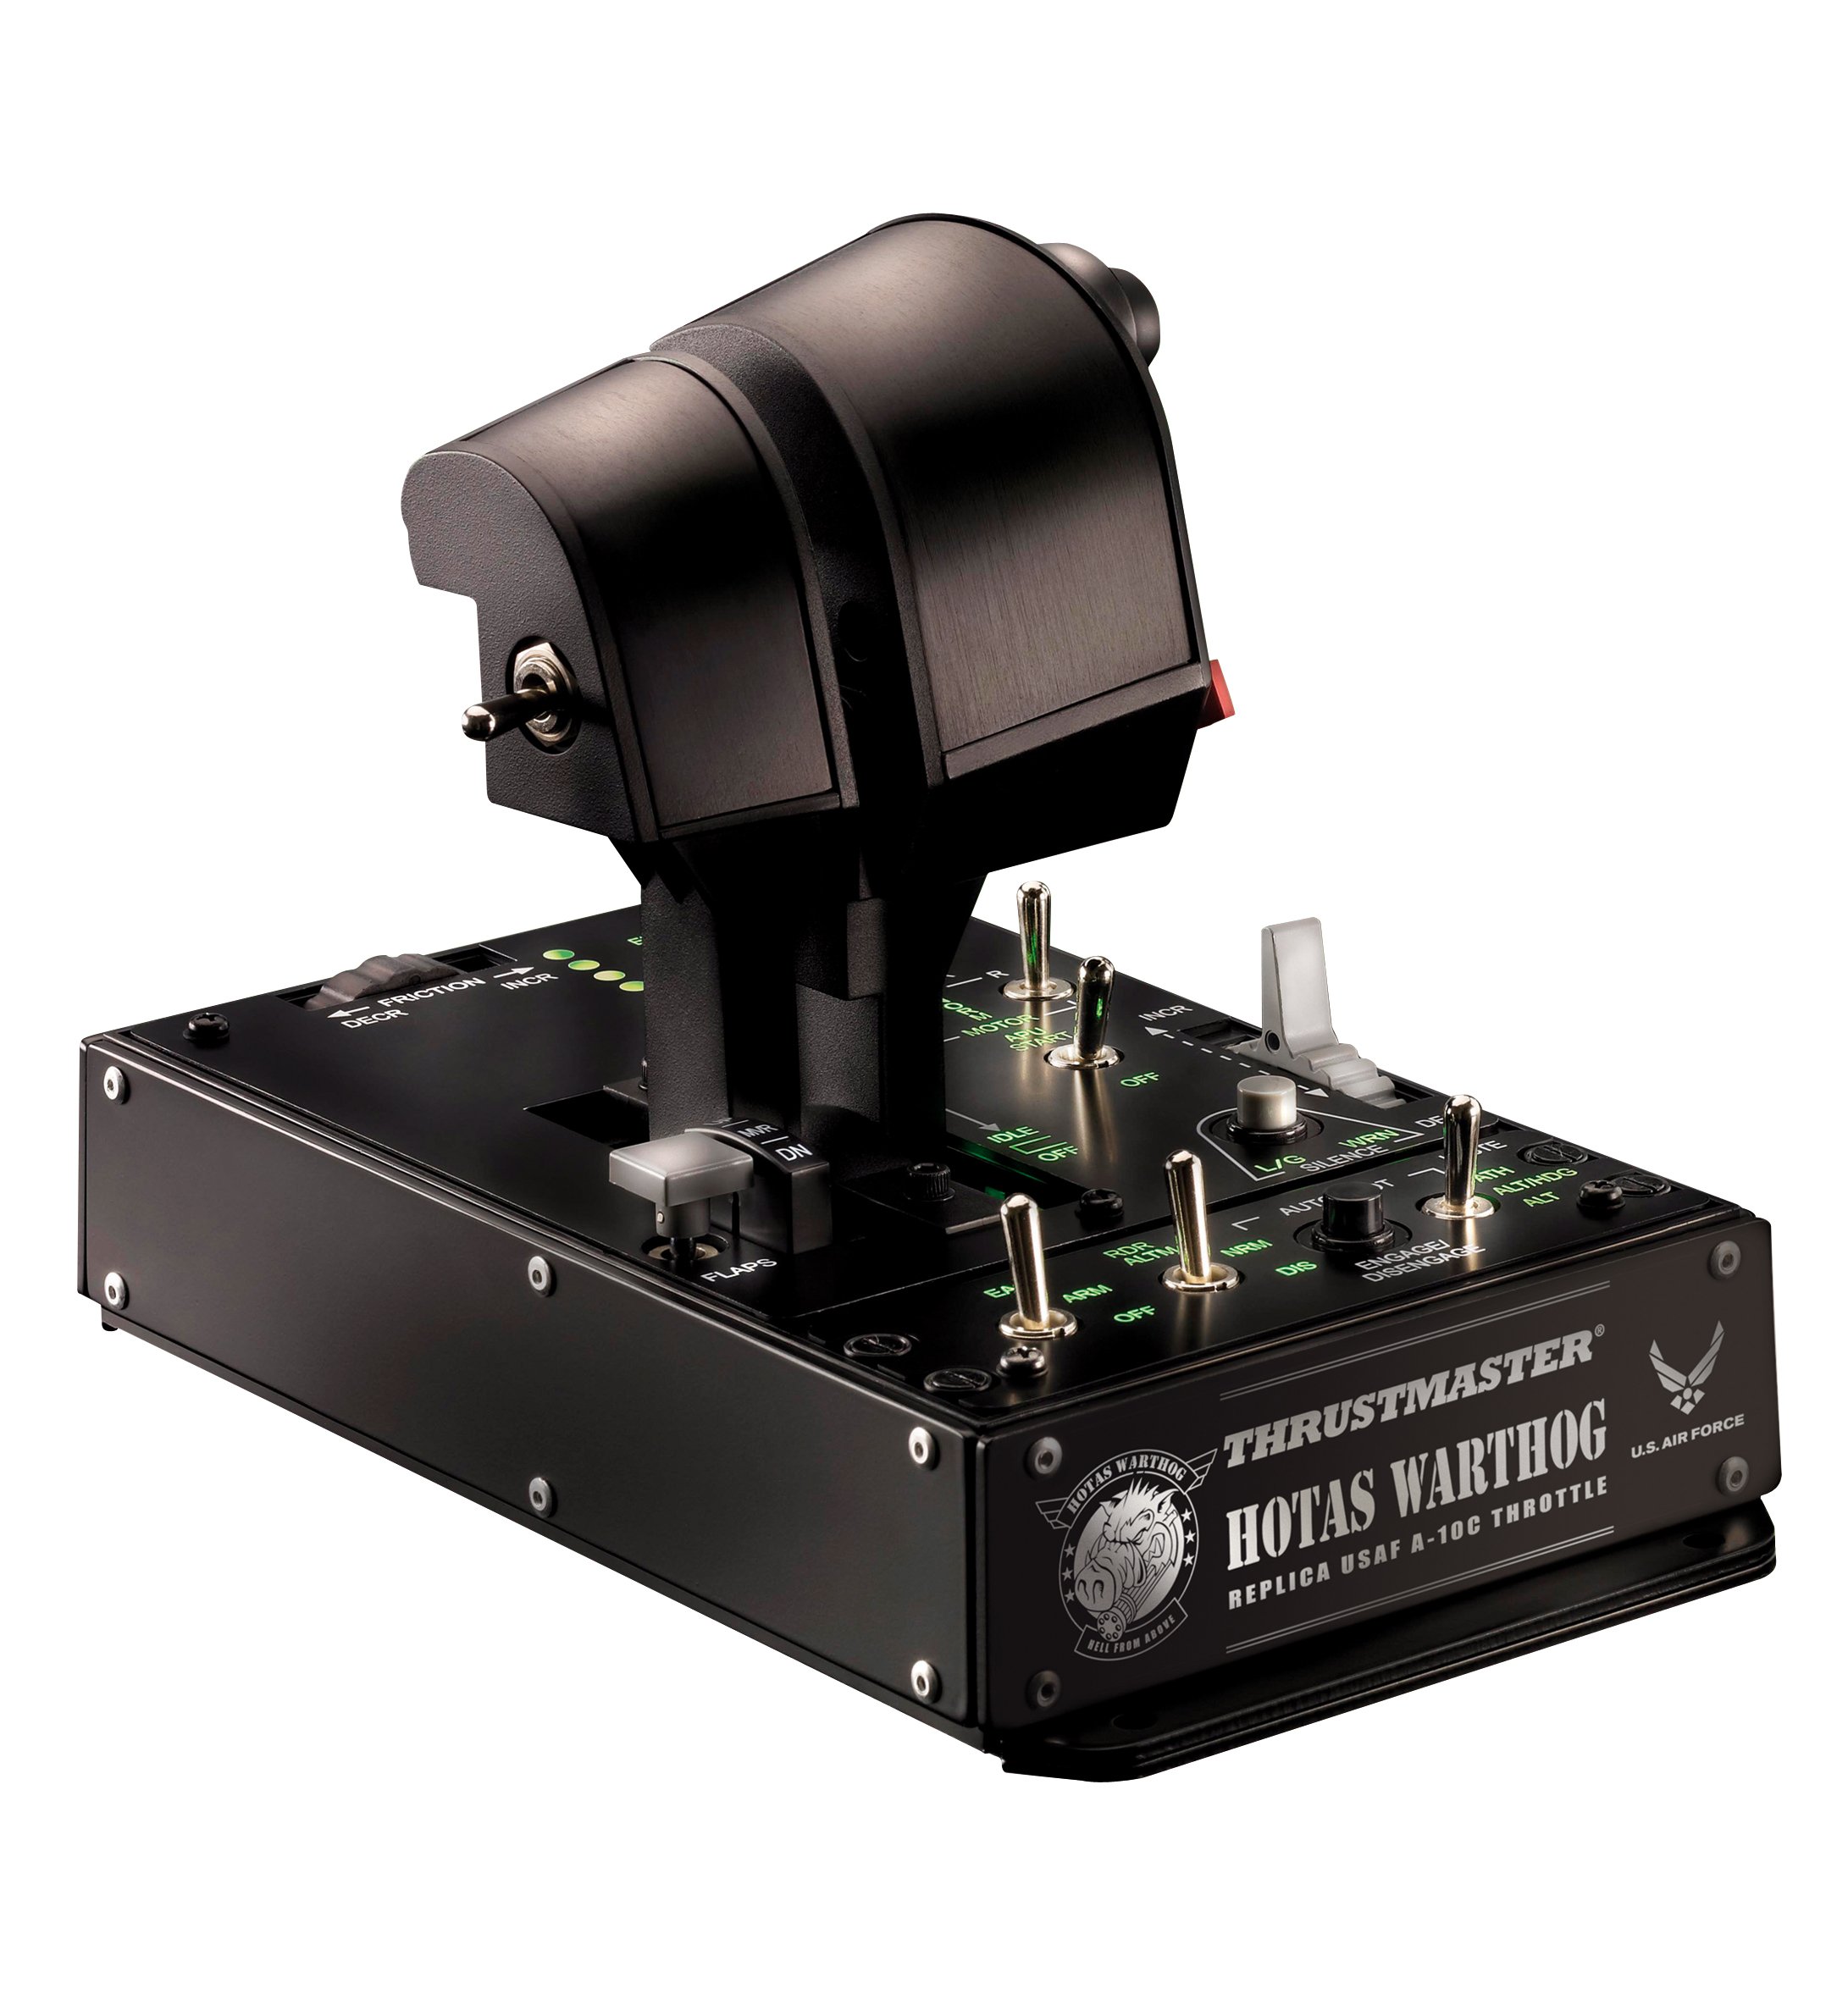 Thrustmaster HOTAS Warthog Dual Throttles for Flight Simulation, Official Replica of the U.S Air Force A-10C Aircraft (PC)